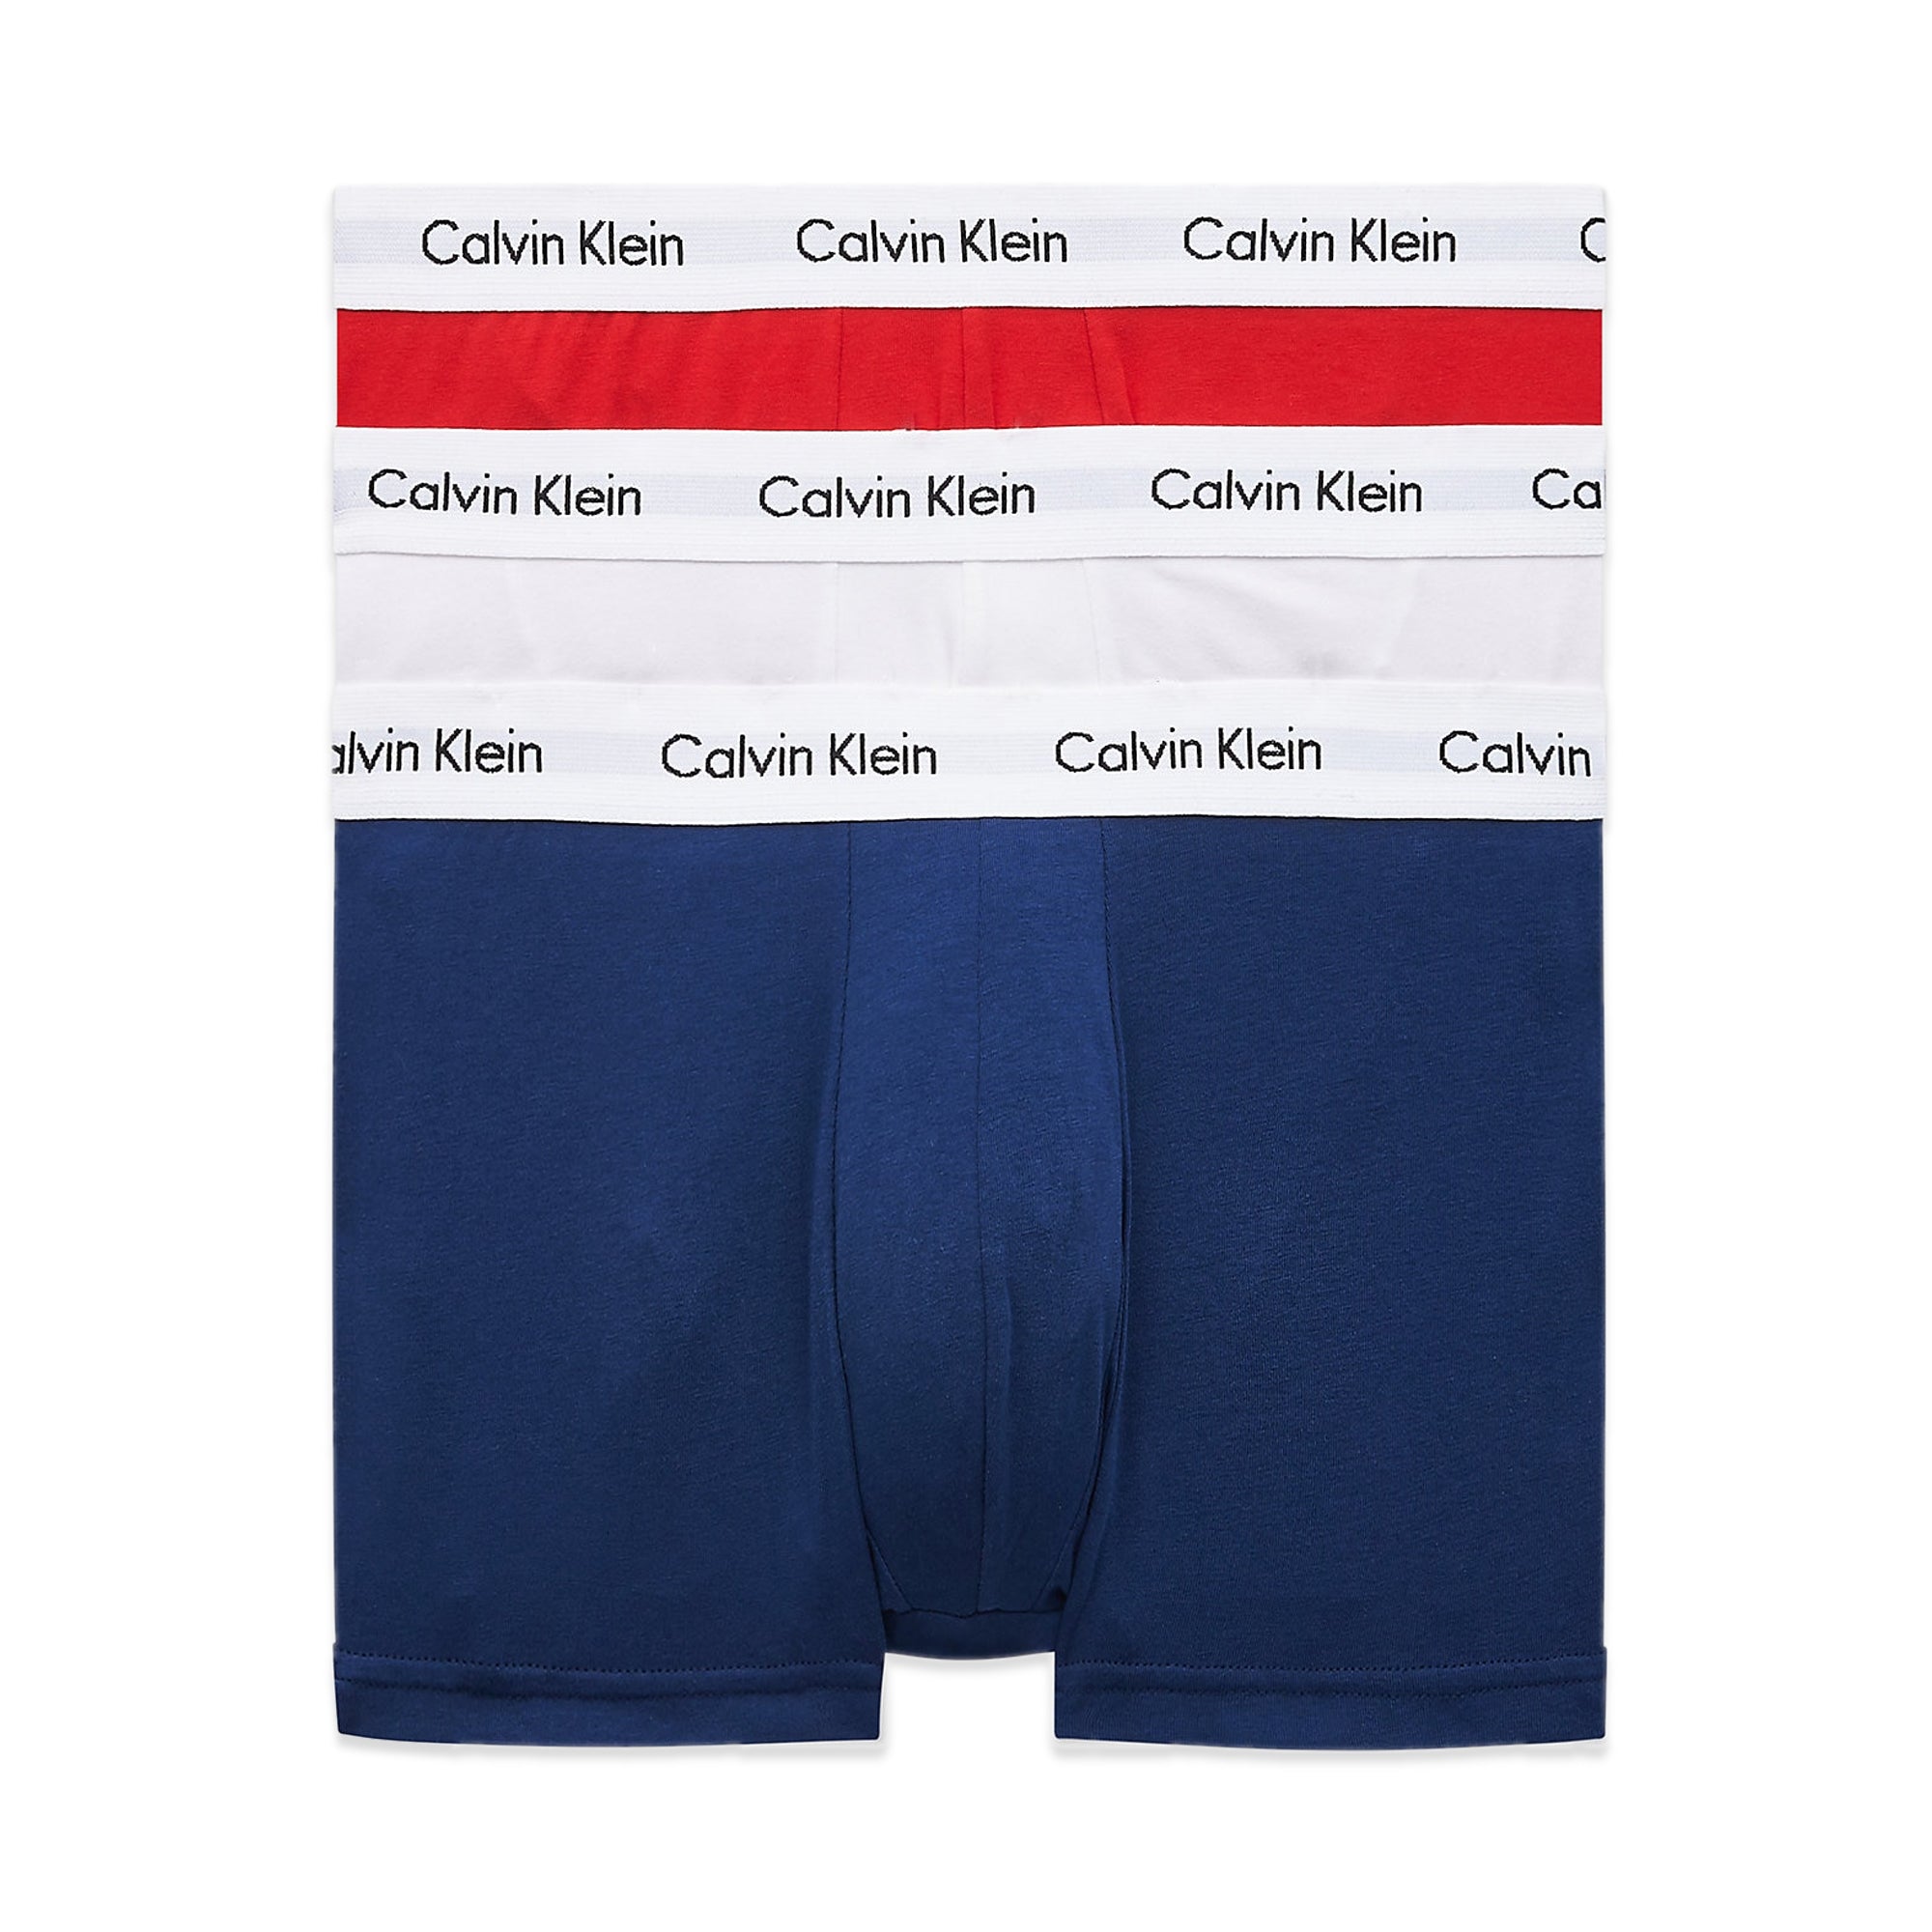 Calvin Klein Low Rise Cotton Stretch Trunks - White/Red/Blue